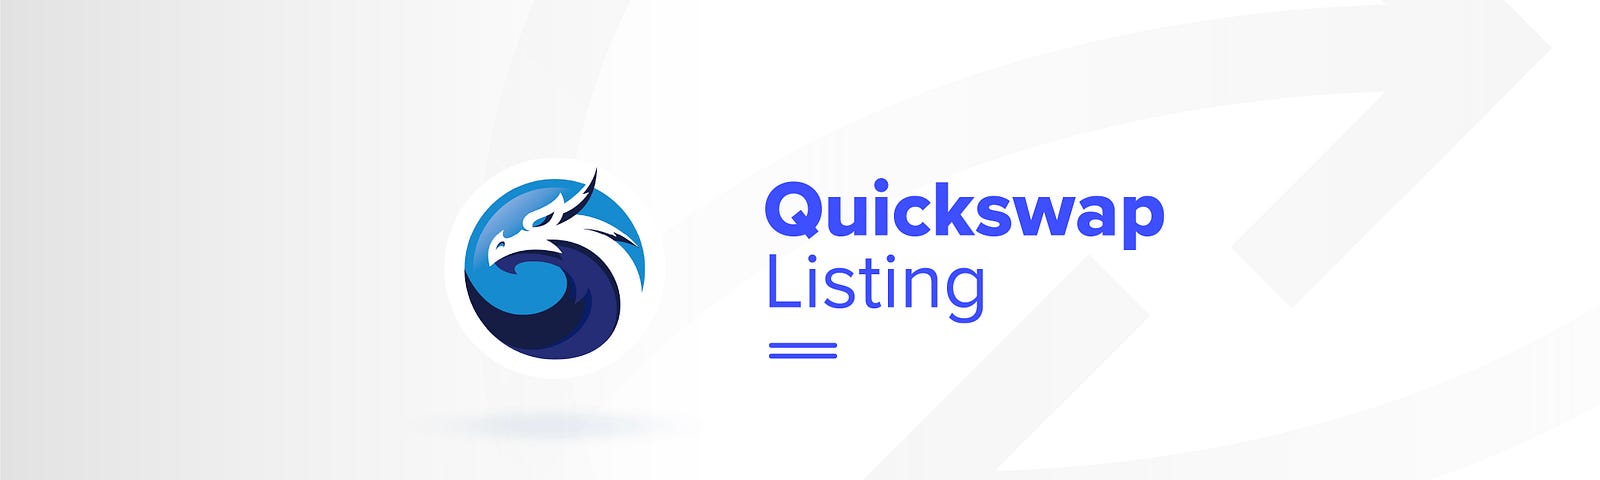 RCN is listed in the largest decentralized exchange of the Polygon Network, Quickswap.